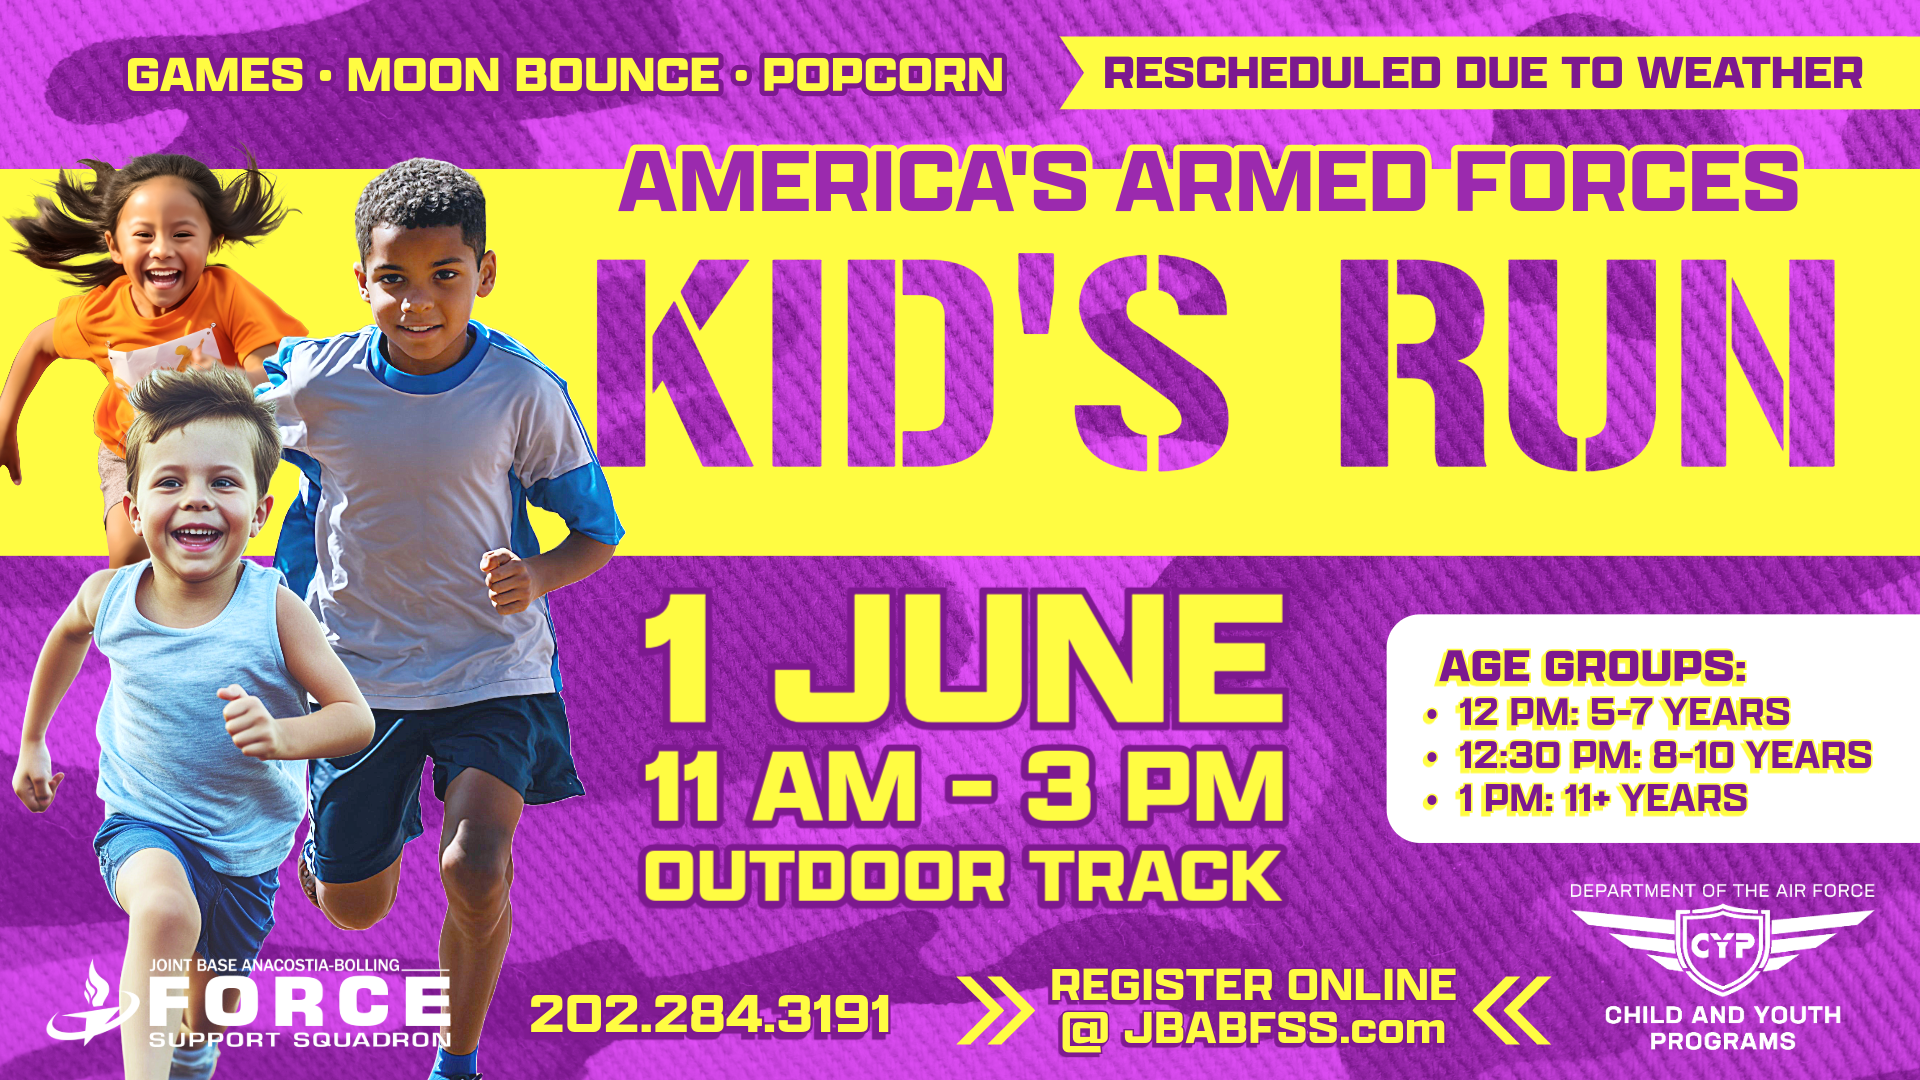 America’s Armed Forces Kids Run Registration for Ages 8-10